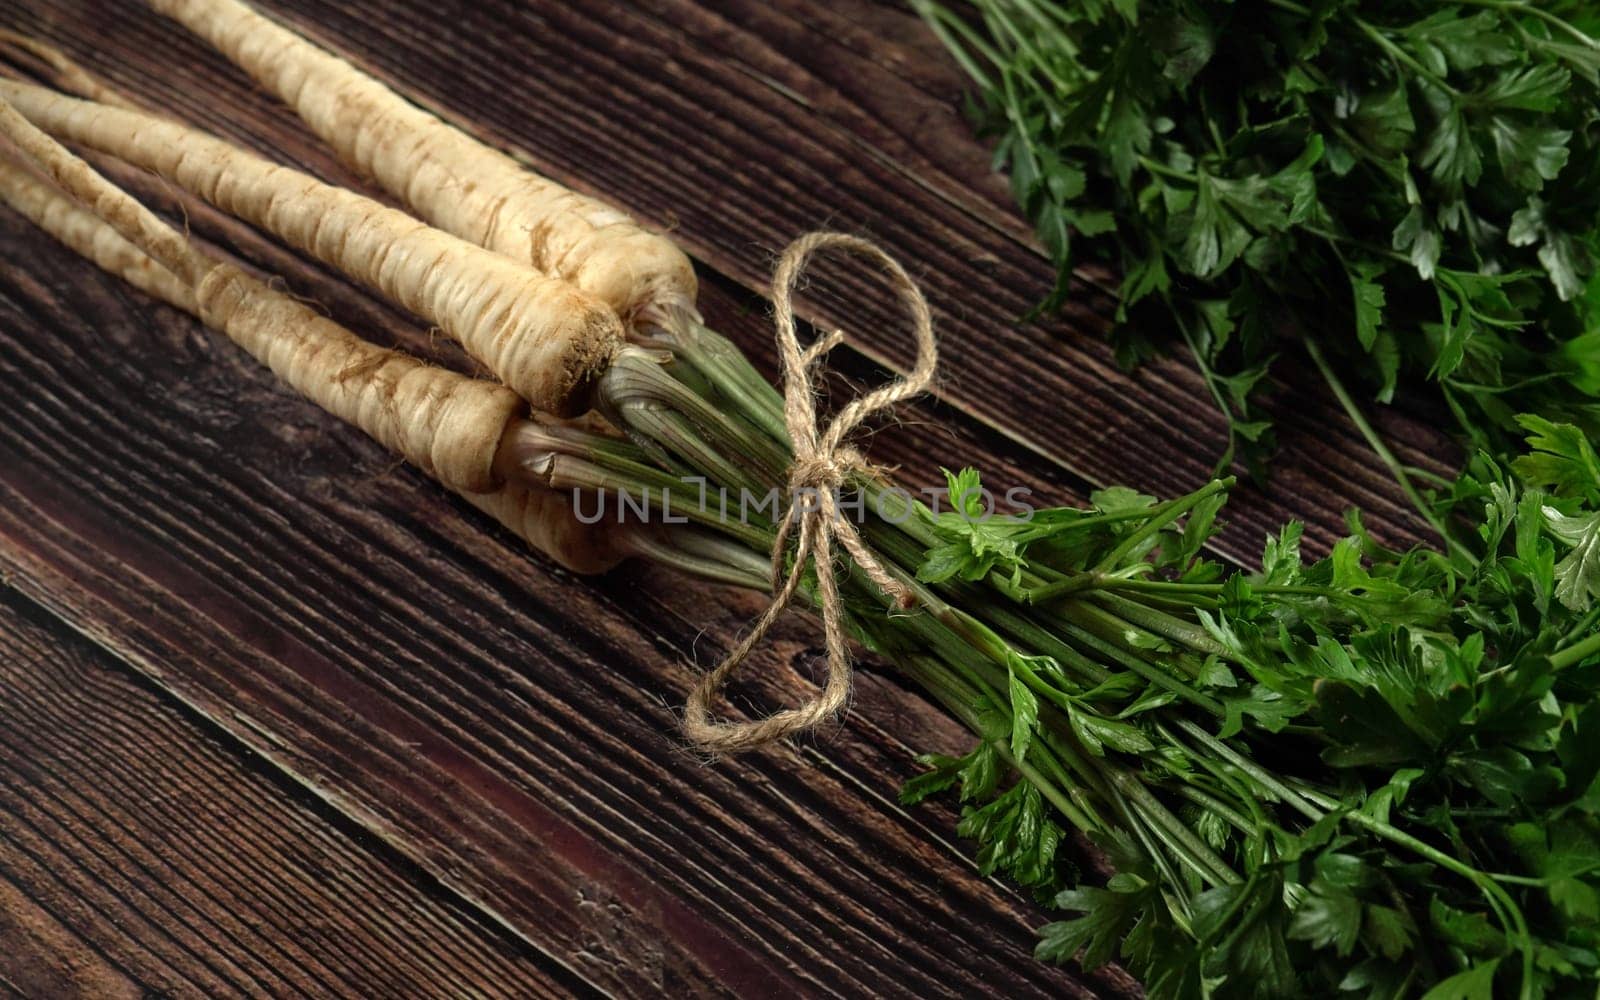 Bunch of white parsnip roots with green leaves on dark wooden rustic board, photo from above by Ivanko